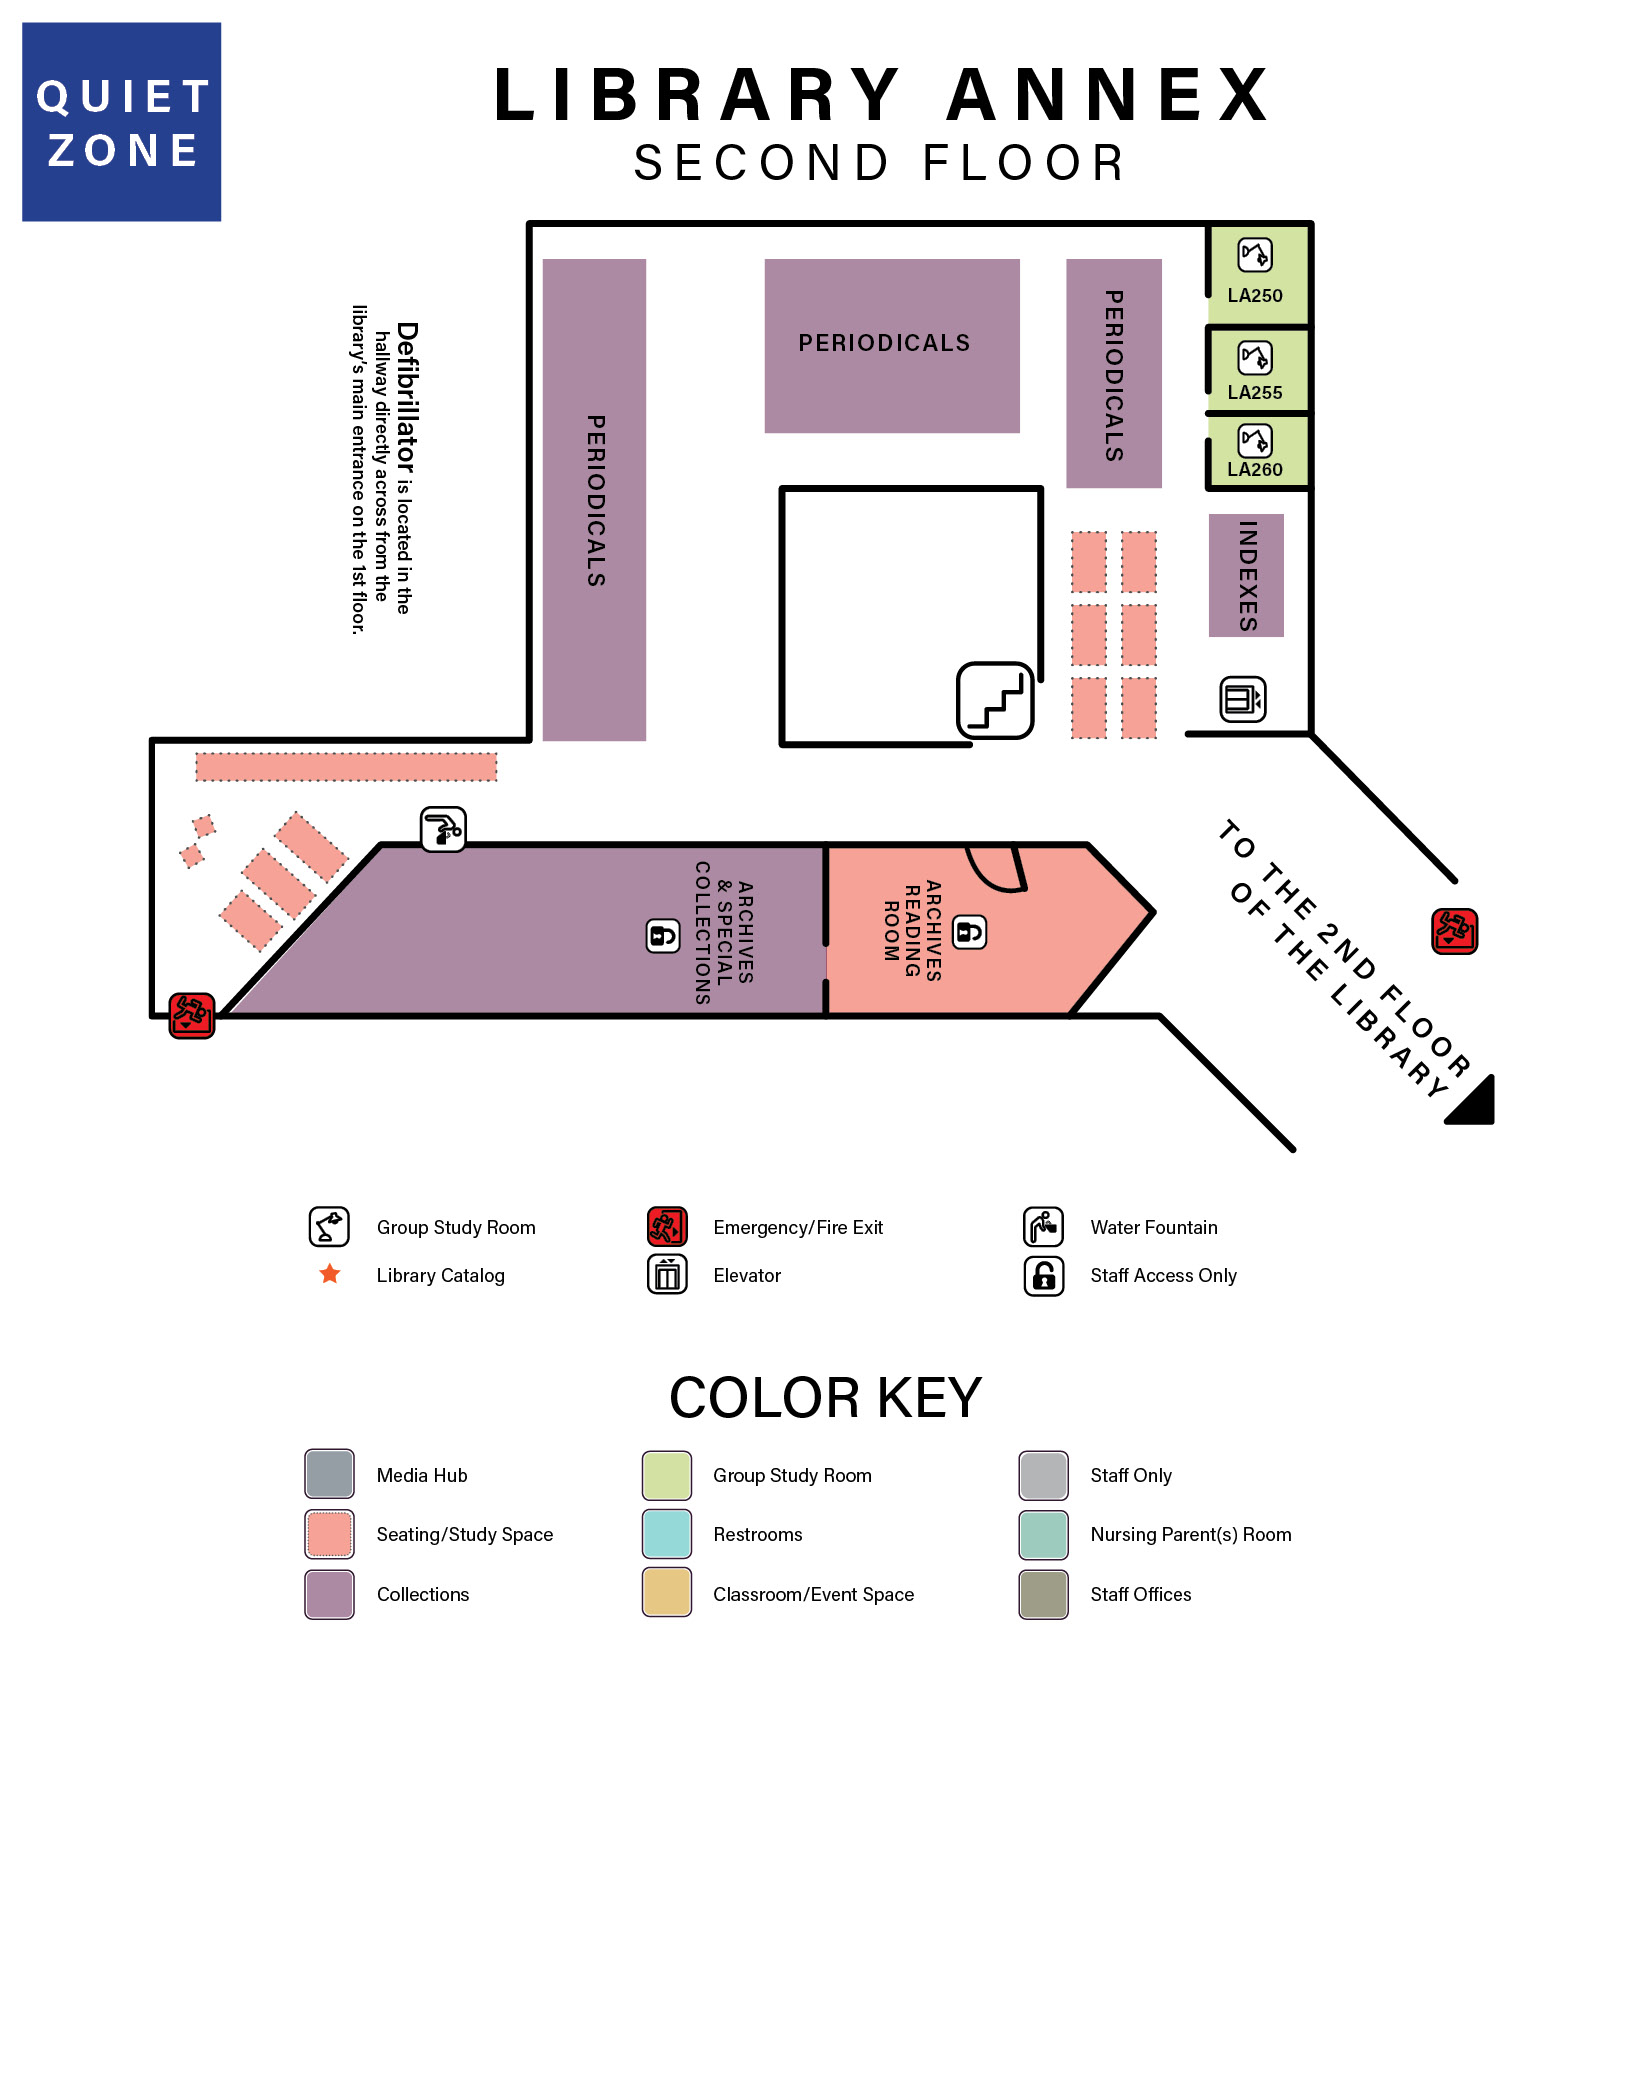 map of library annex second floor which includes descriptions of spaces and colored areas indicating types of spaces